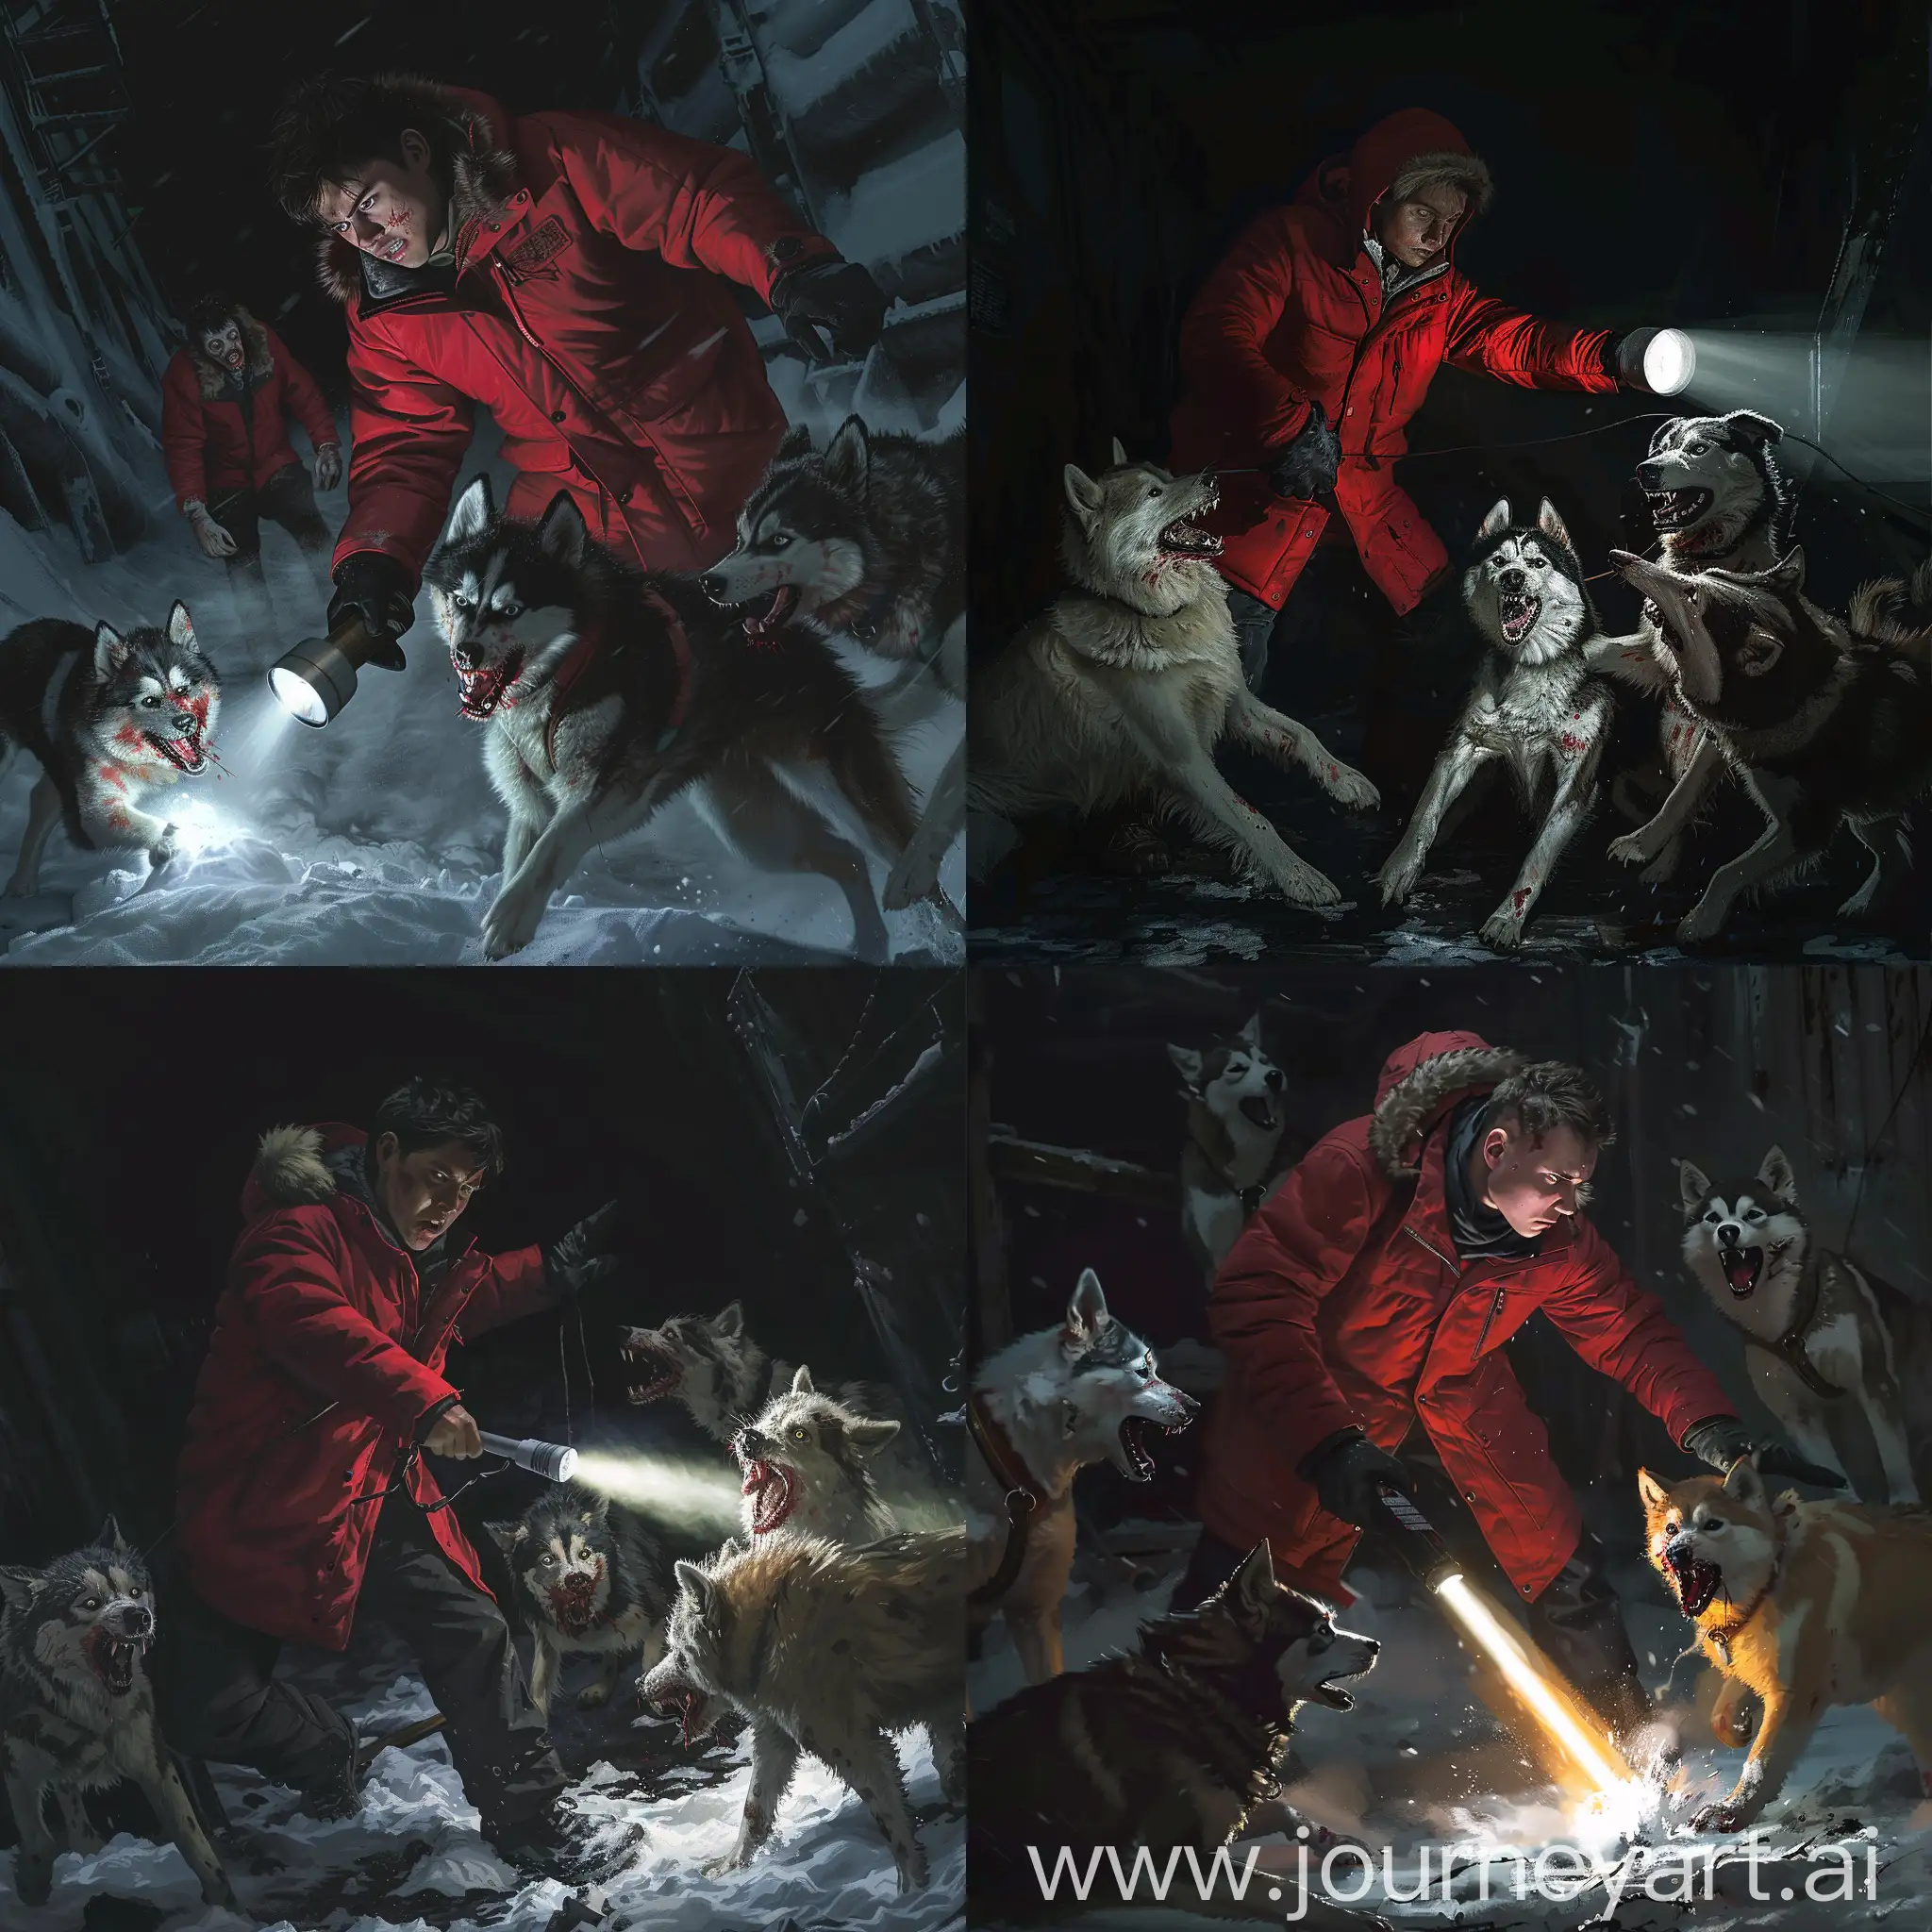 Realistic art: young man in red parka fighting with zombie husky dogs at abandoned industrial mine. Dogs is infected. Dark scene. He's weak. He holding bright flashlight